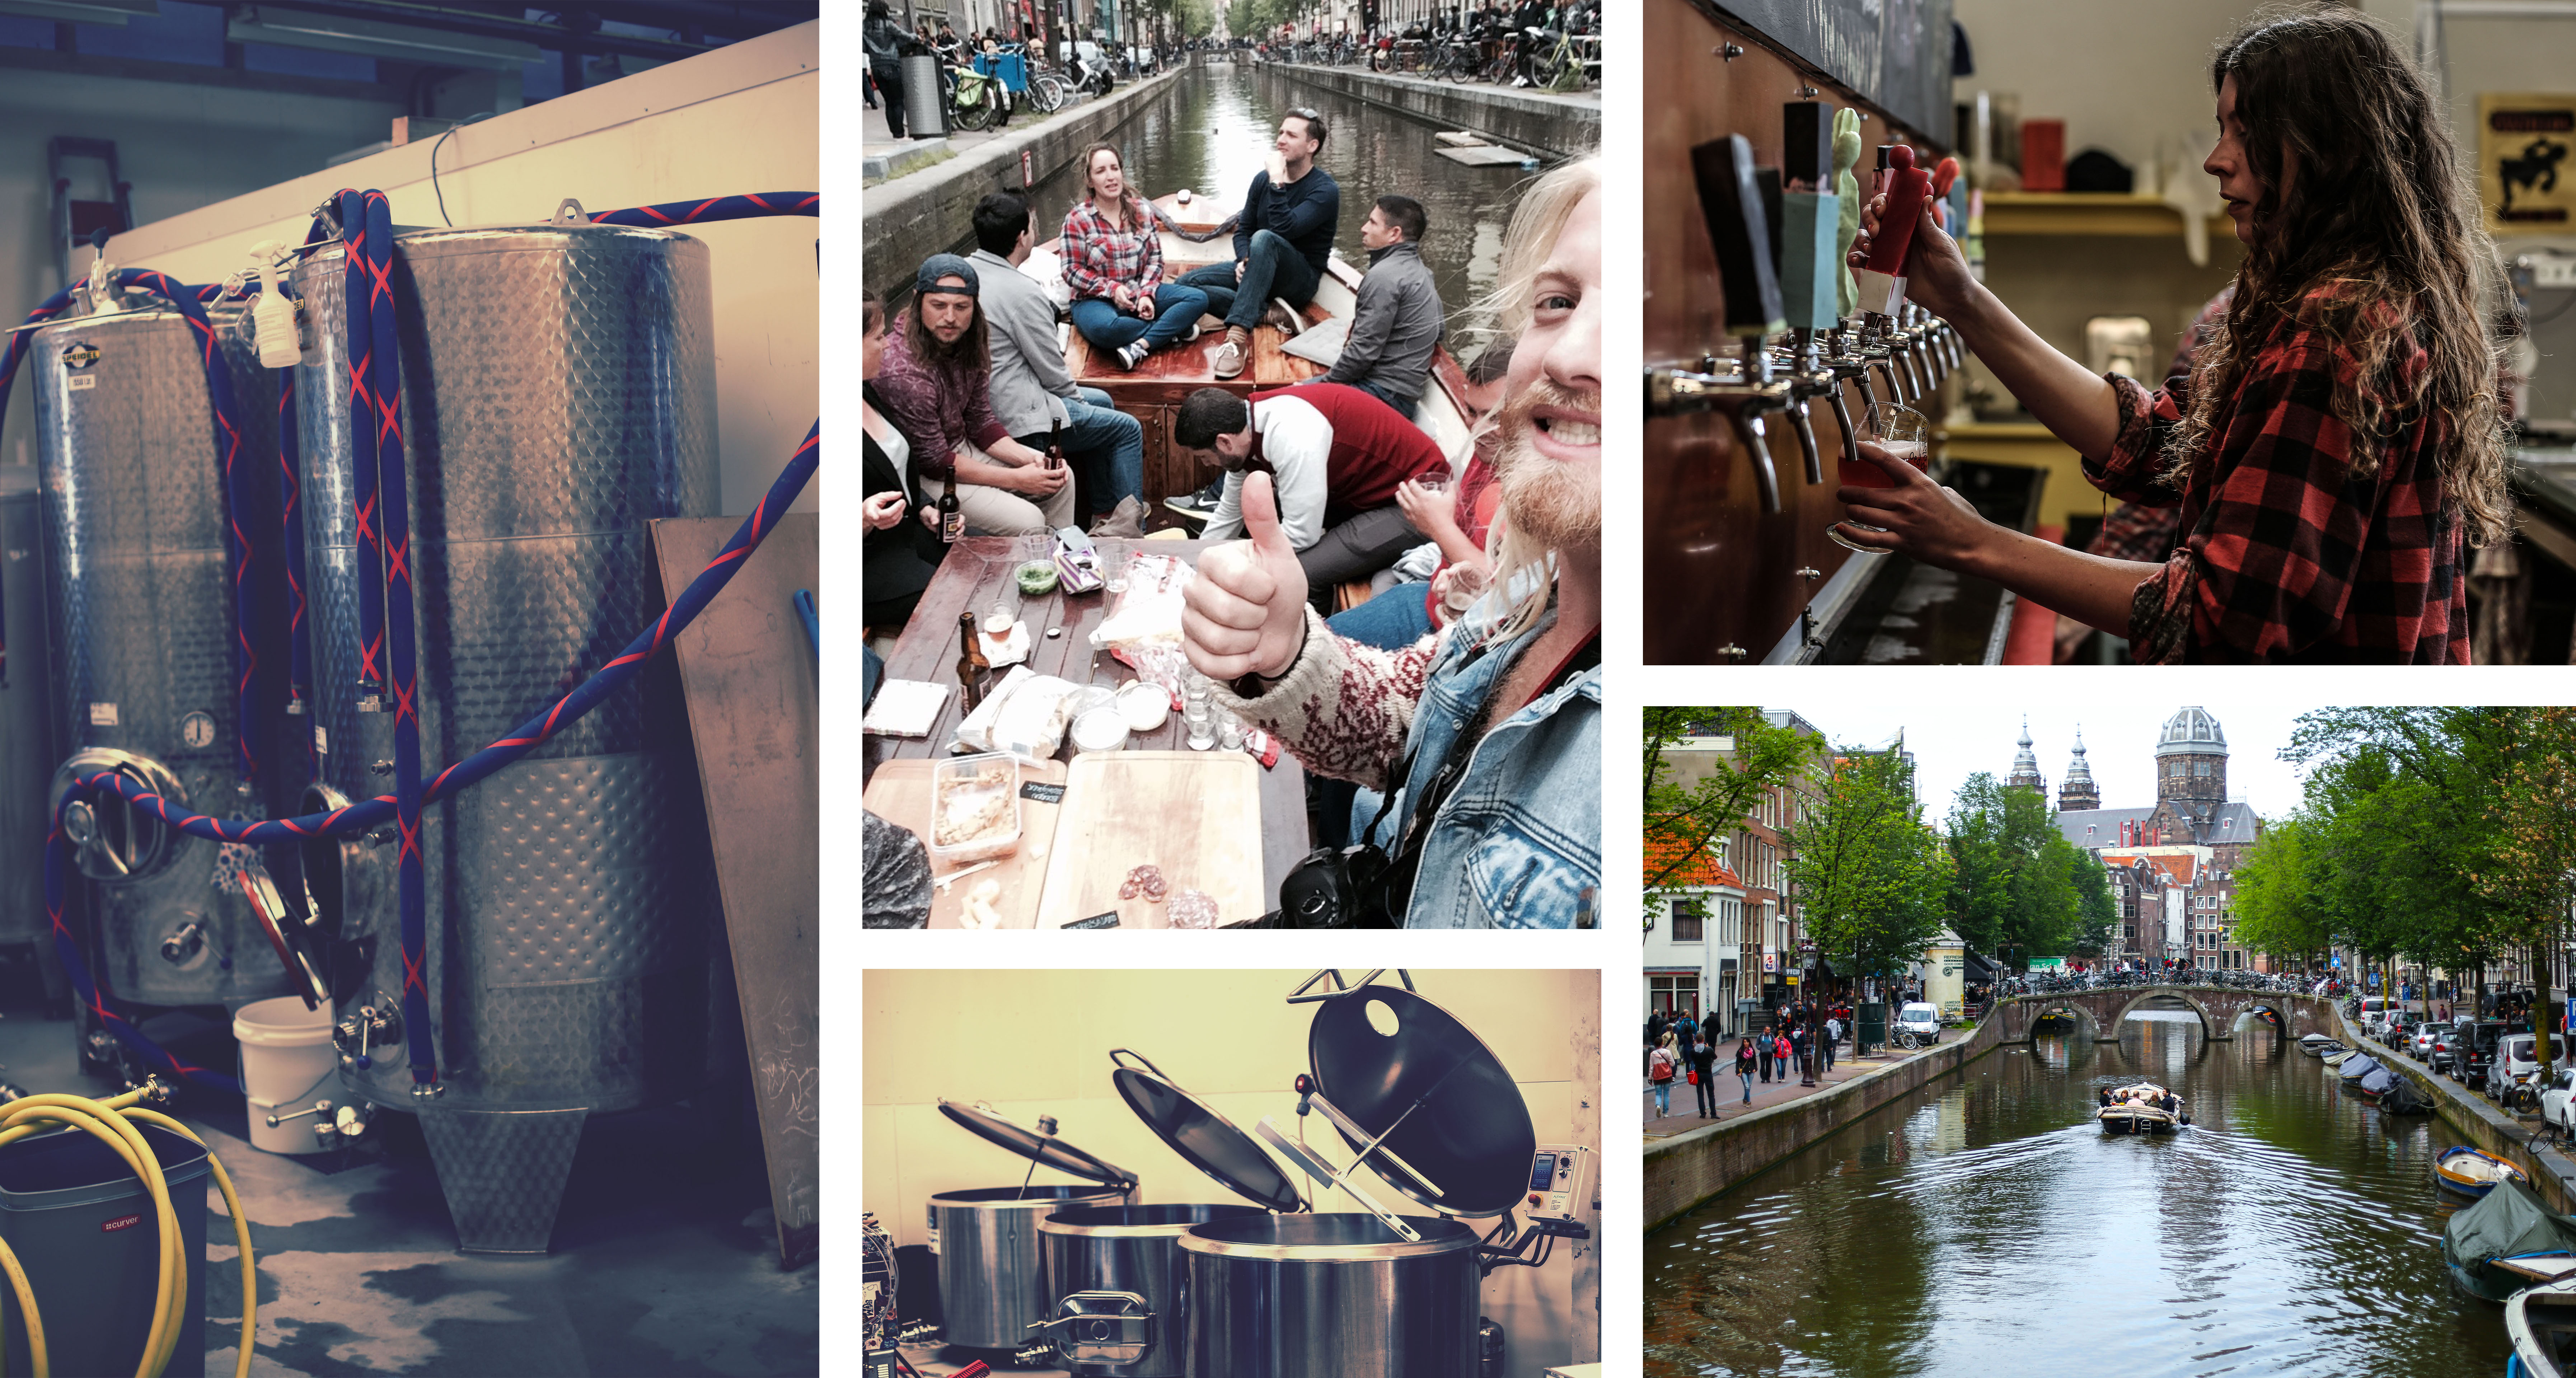 Amsterdam craft beer guide image 6